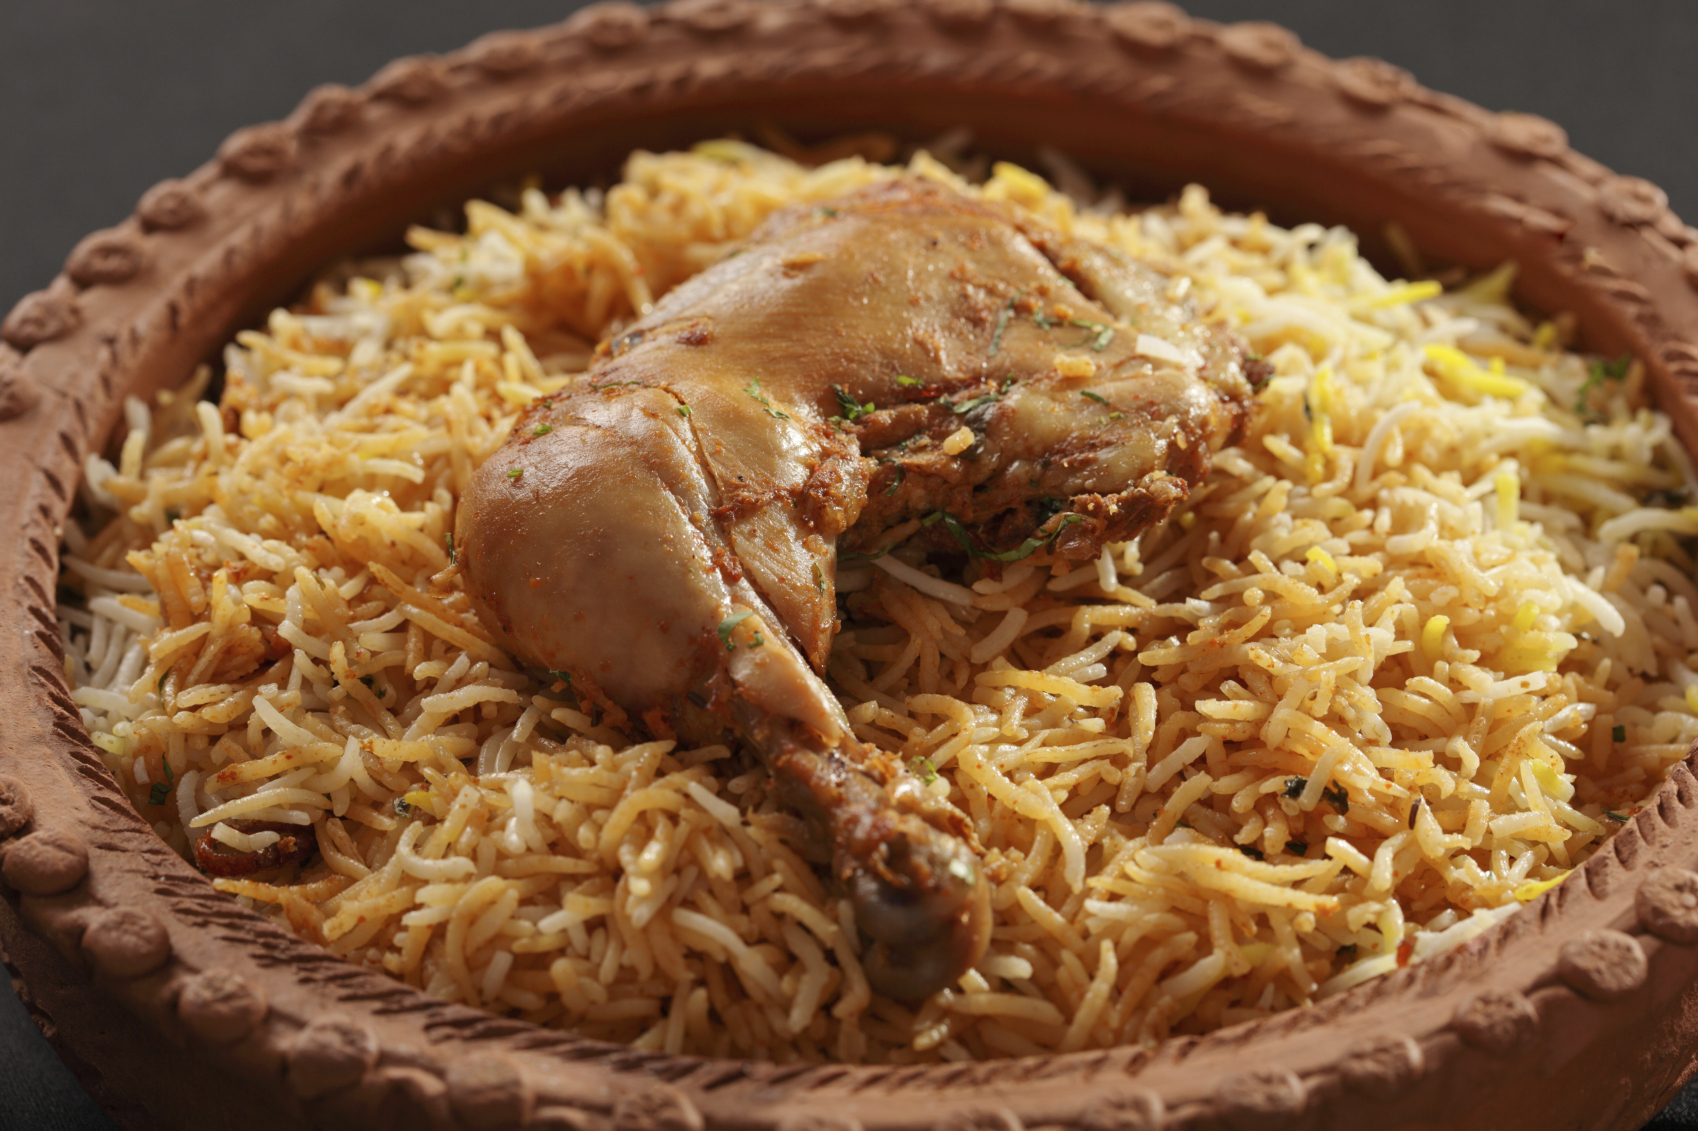 Hyderabadi Biryani - is perhaps the most well-known Non-Vegetarian culinary delights from the famous Hyderabad Cuisine. It is a traditional dish made using Basmati rice, goat meat and various other exotic spices.